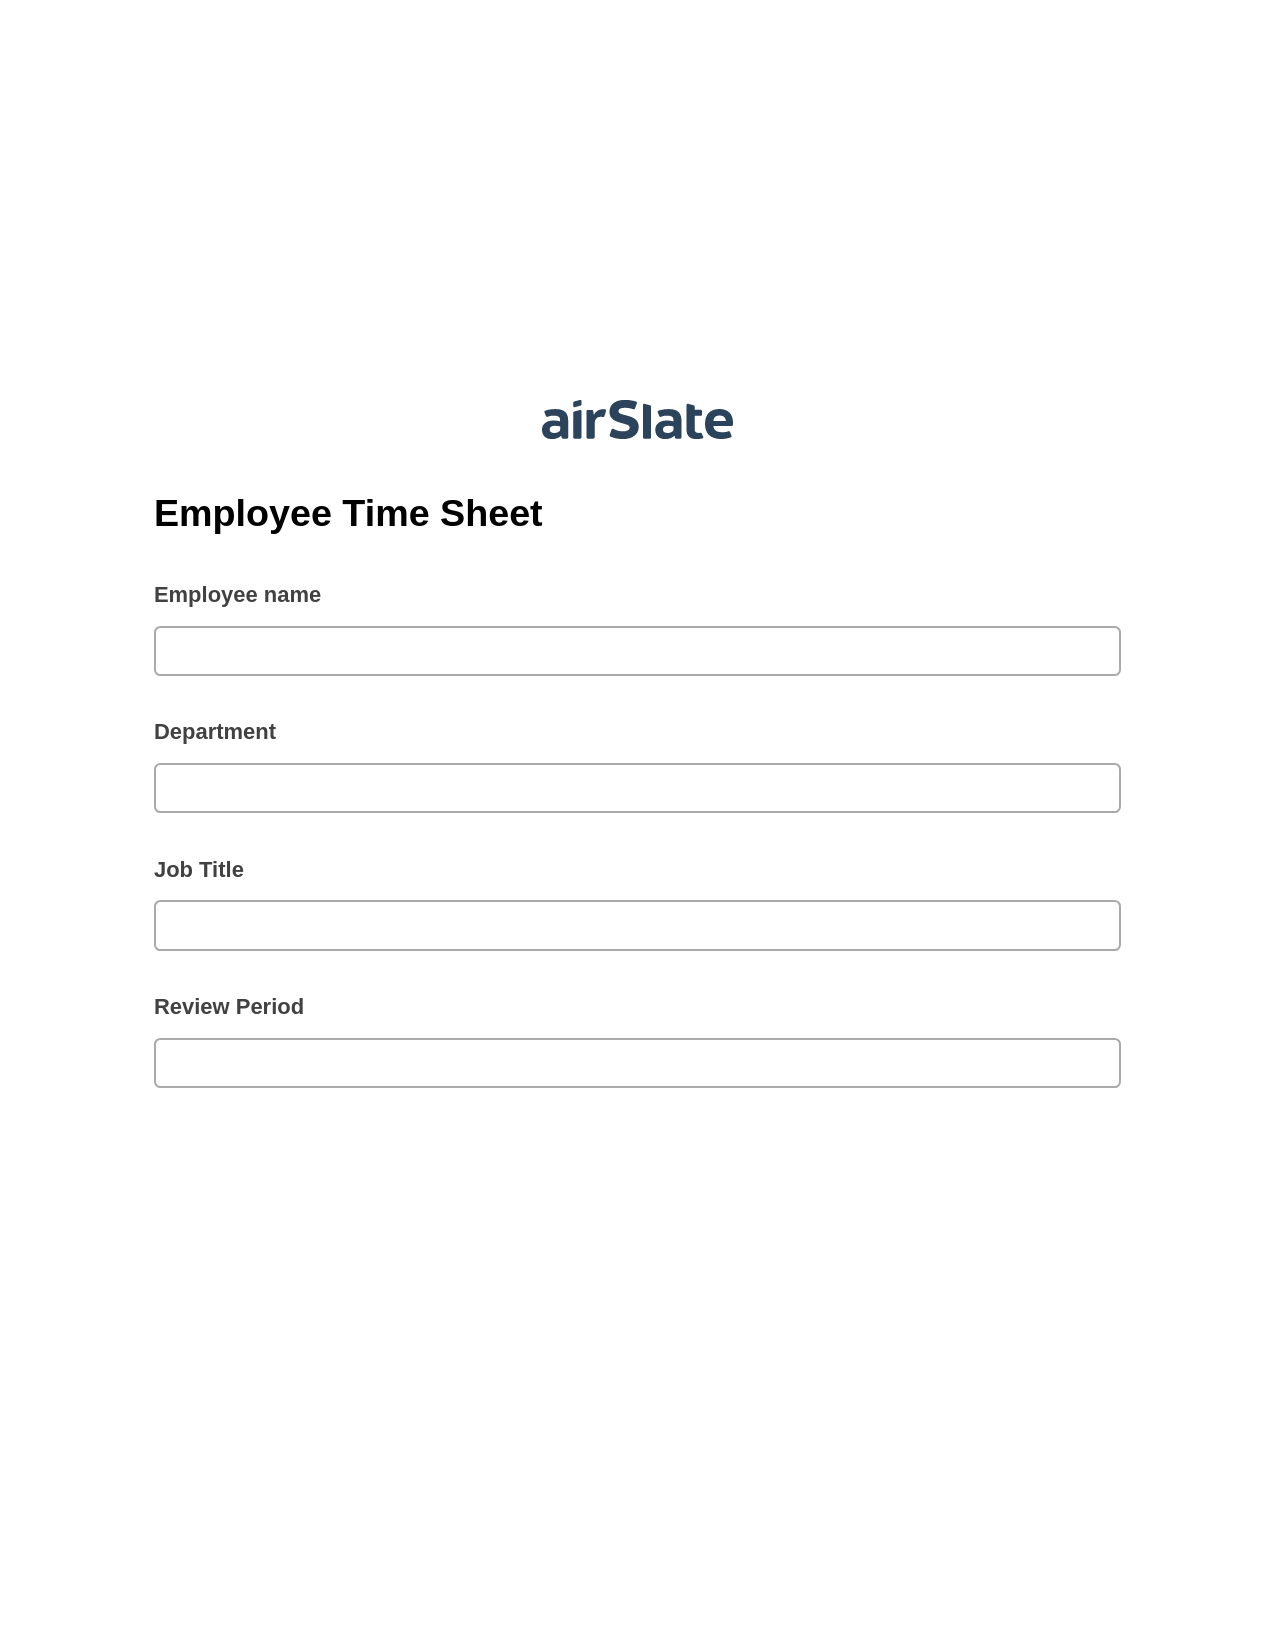 Multirole Employee Time Sheet Pre-fill from MS Dynamics 365 Records, Create Salesforce Records Bot, Webhook Postfinish Bot